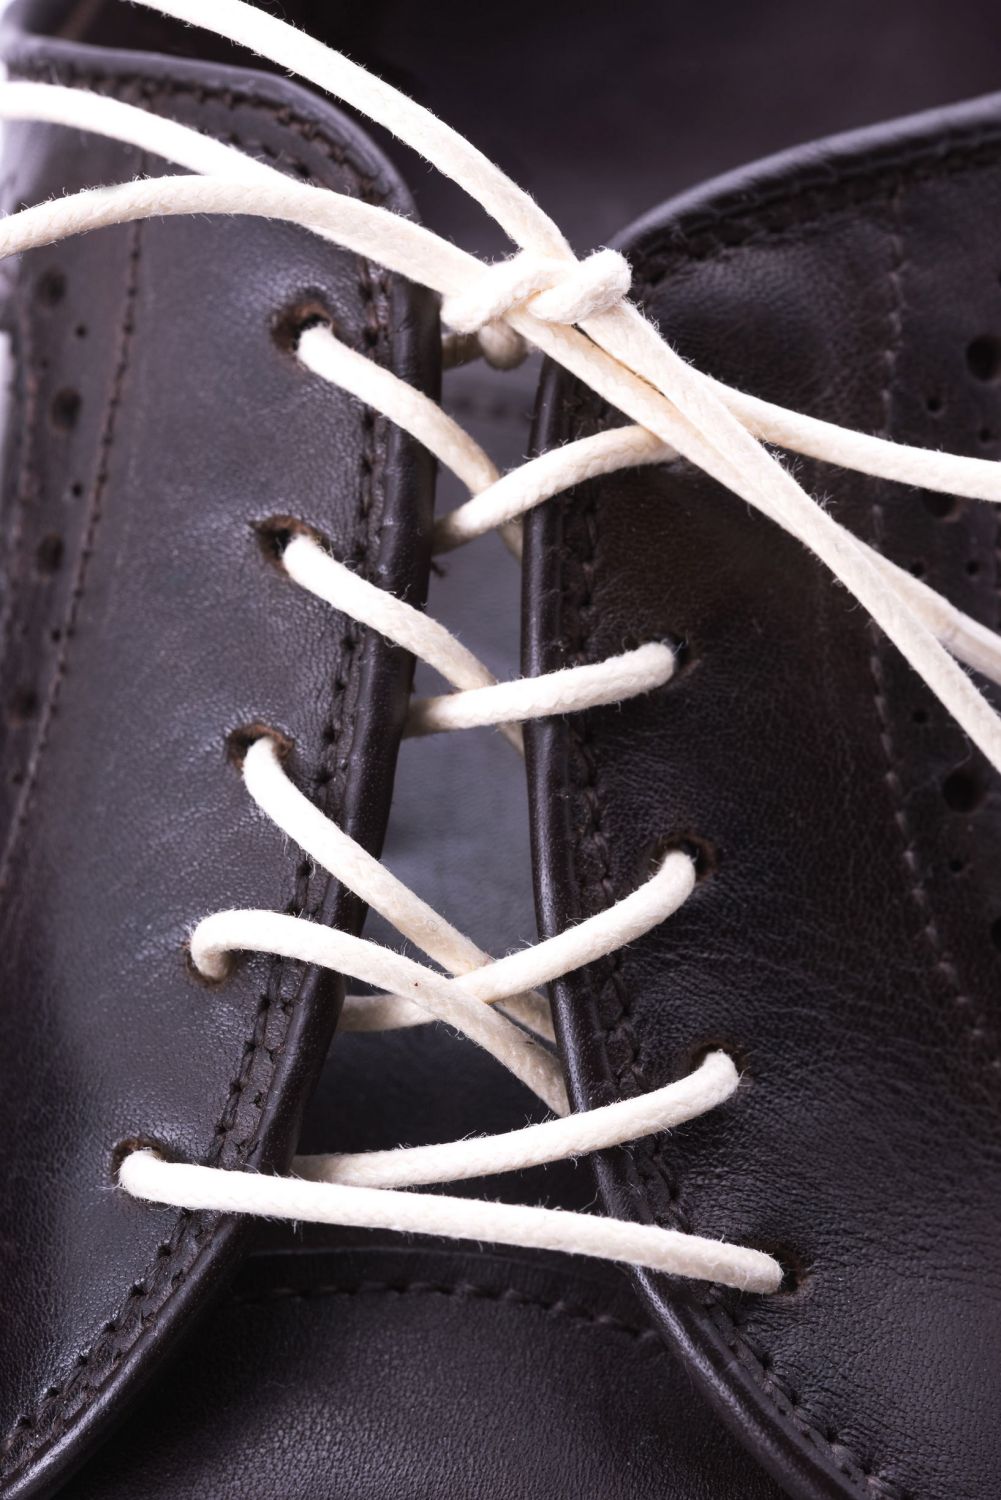 Off White Shoelaces Round - Waxed Cotton Dress Shoe Laces Luxury by ...